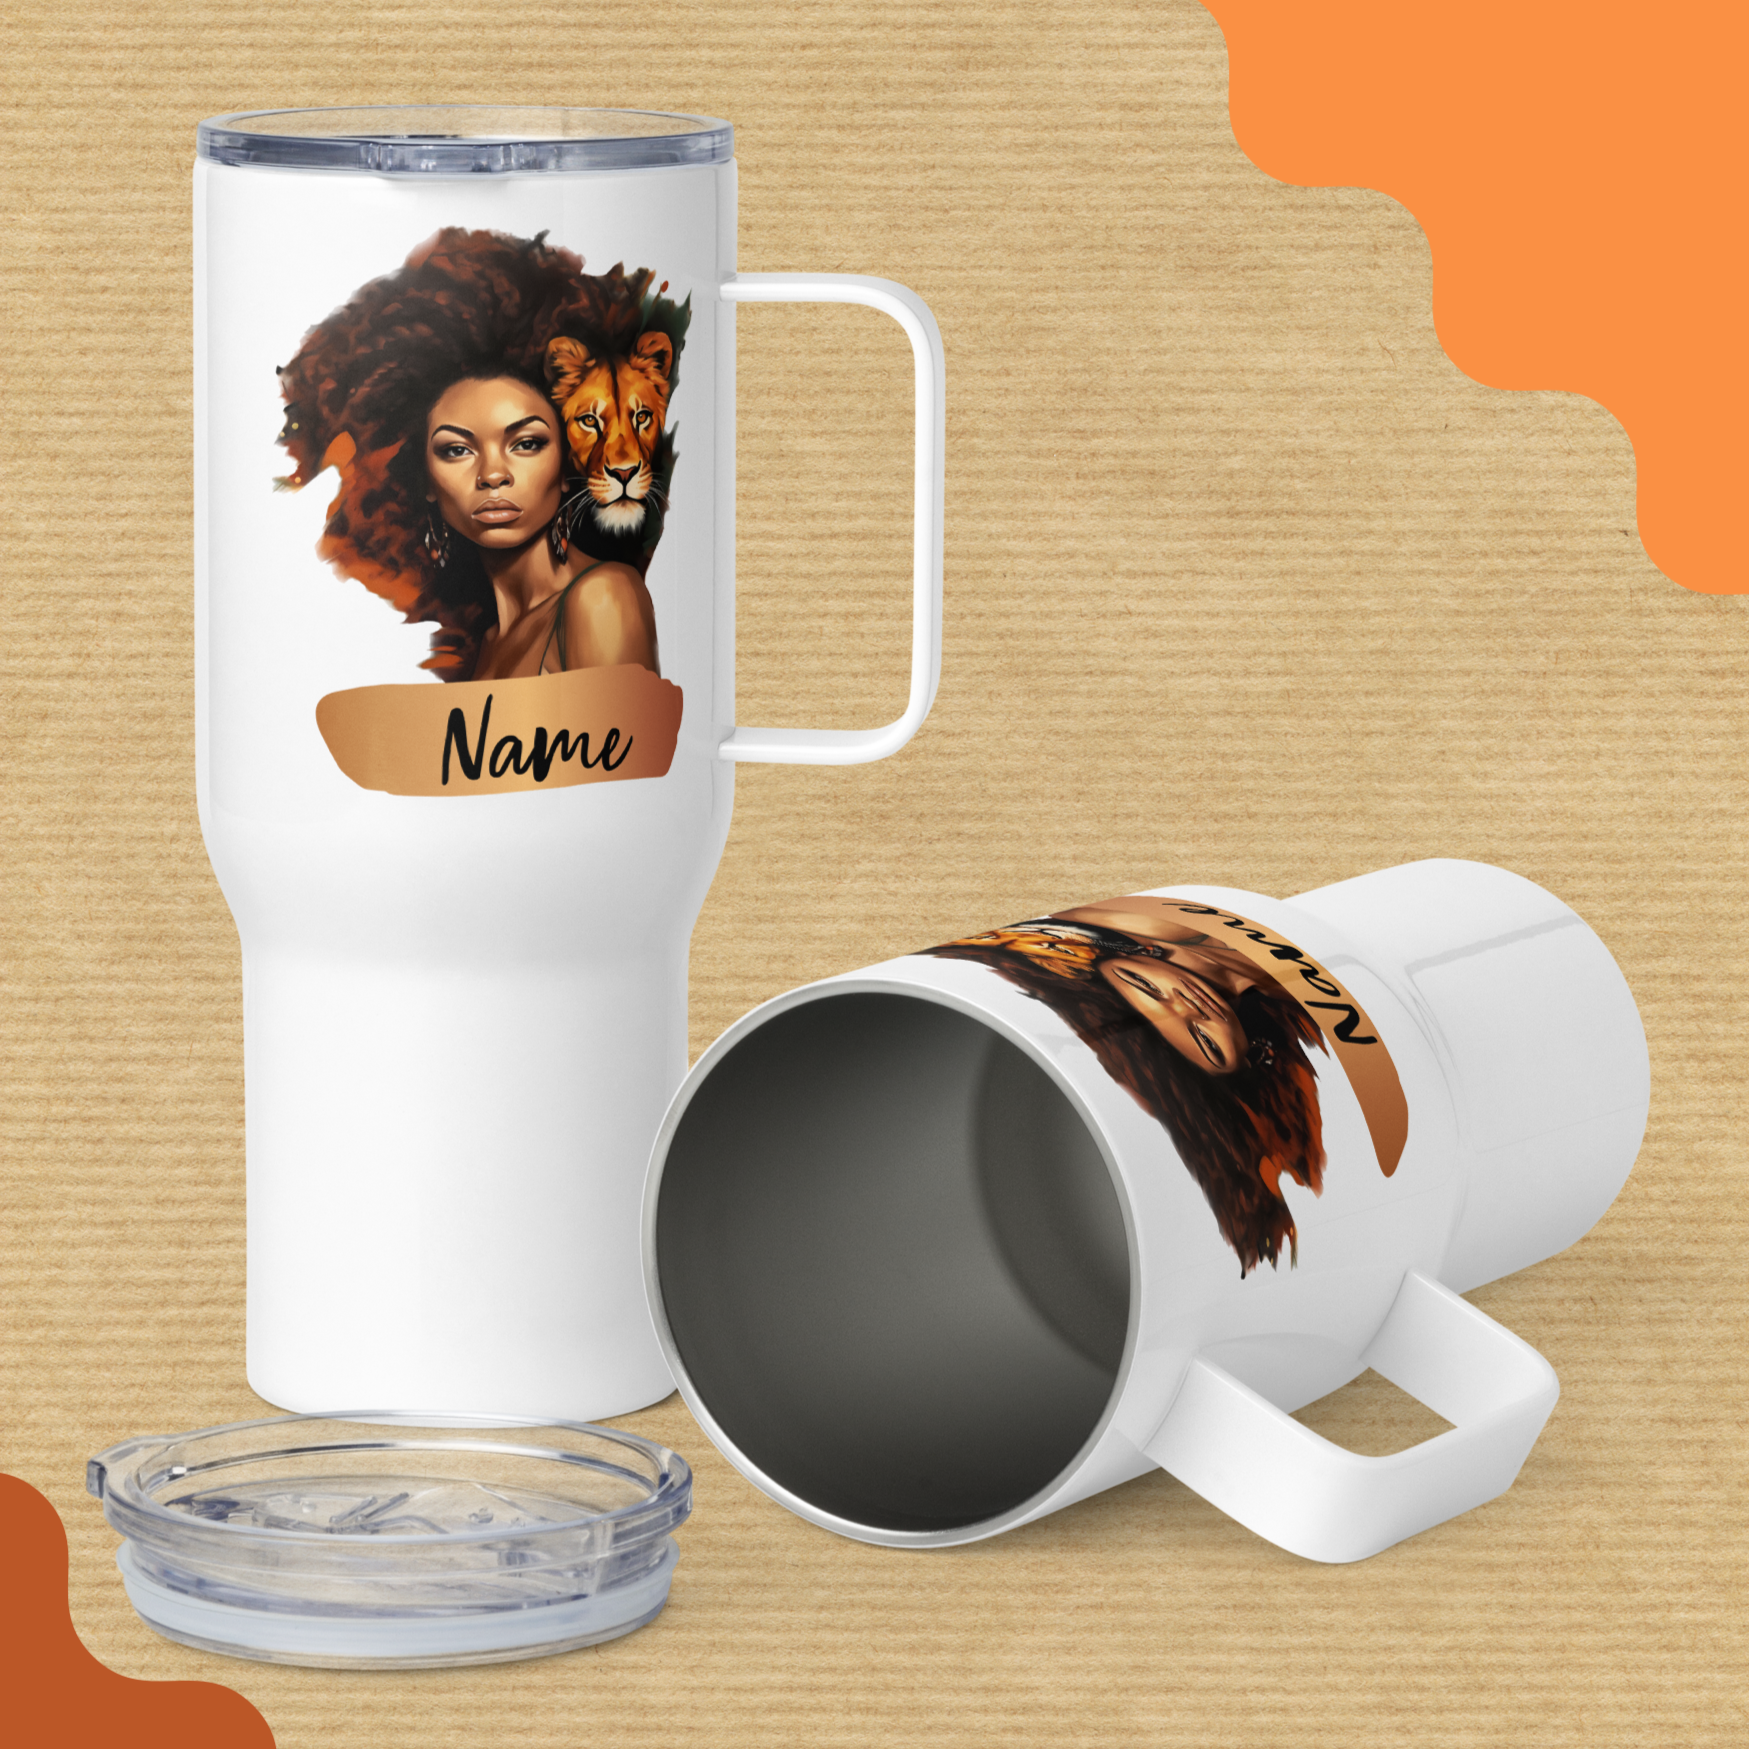 This “Lovely Leo Lady” 25oz stainless steel travel mug has picture of a beautiful black woman in the foreground and a vibrant gold and brown lion in the background.  Mug can personalized with a name.